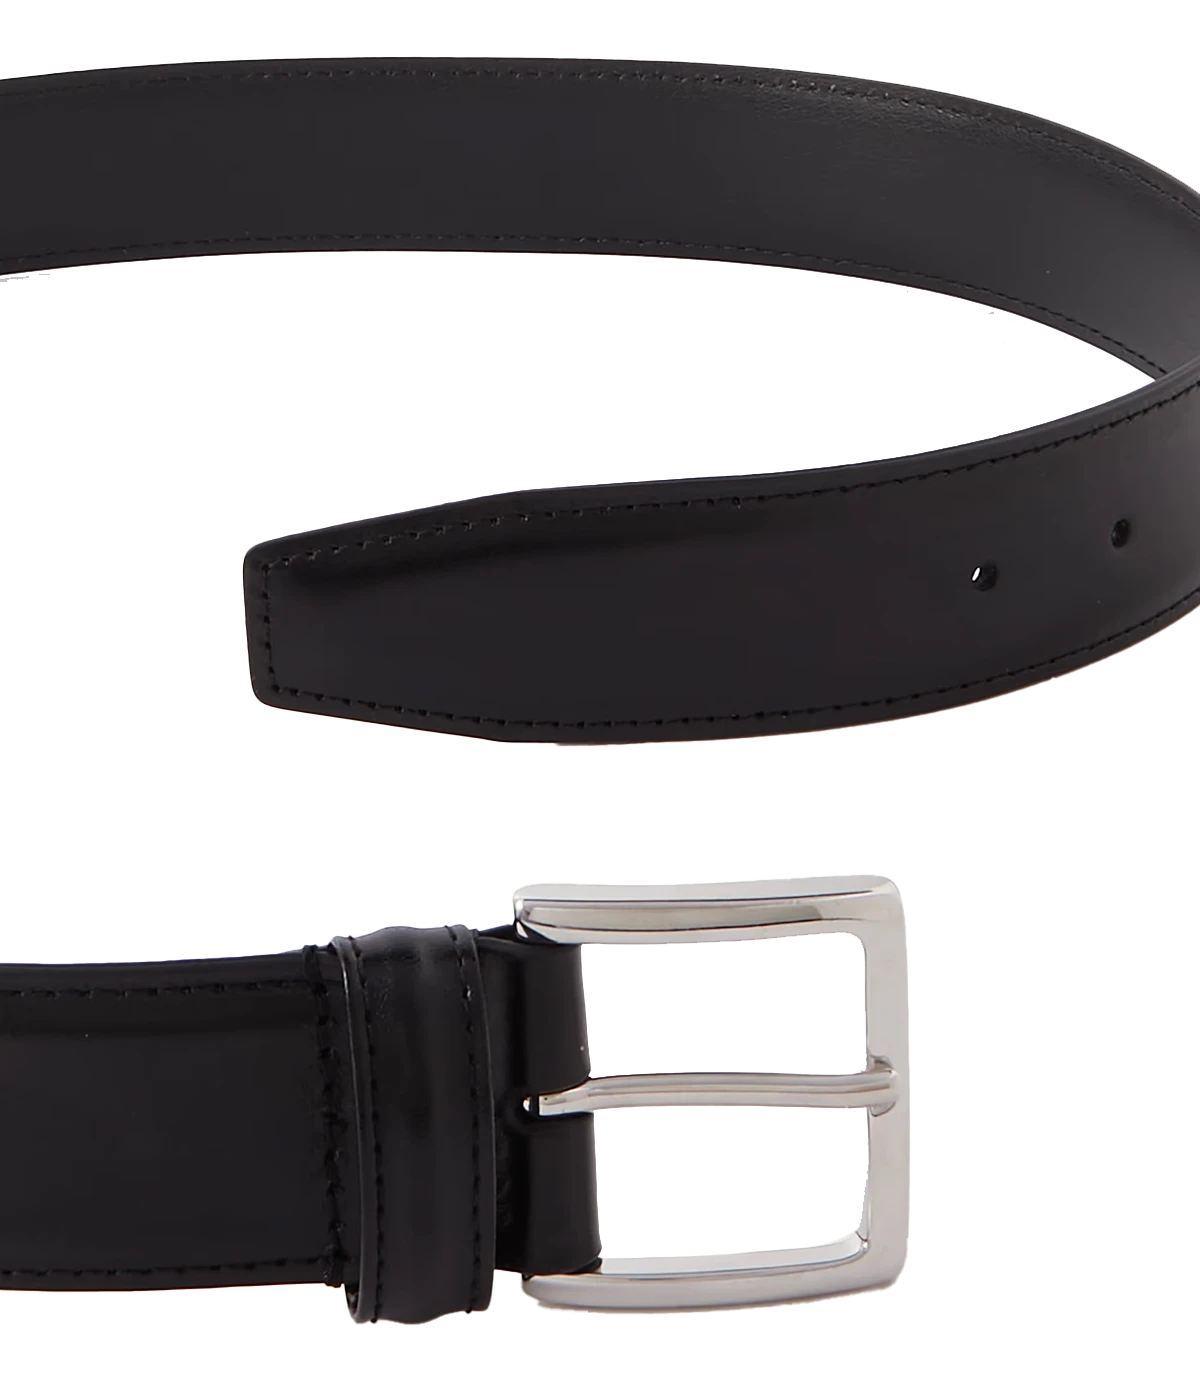 Smooth Leather Belt in Black